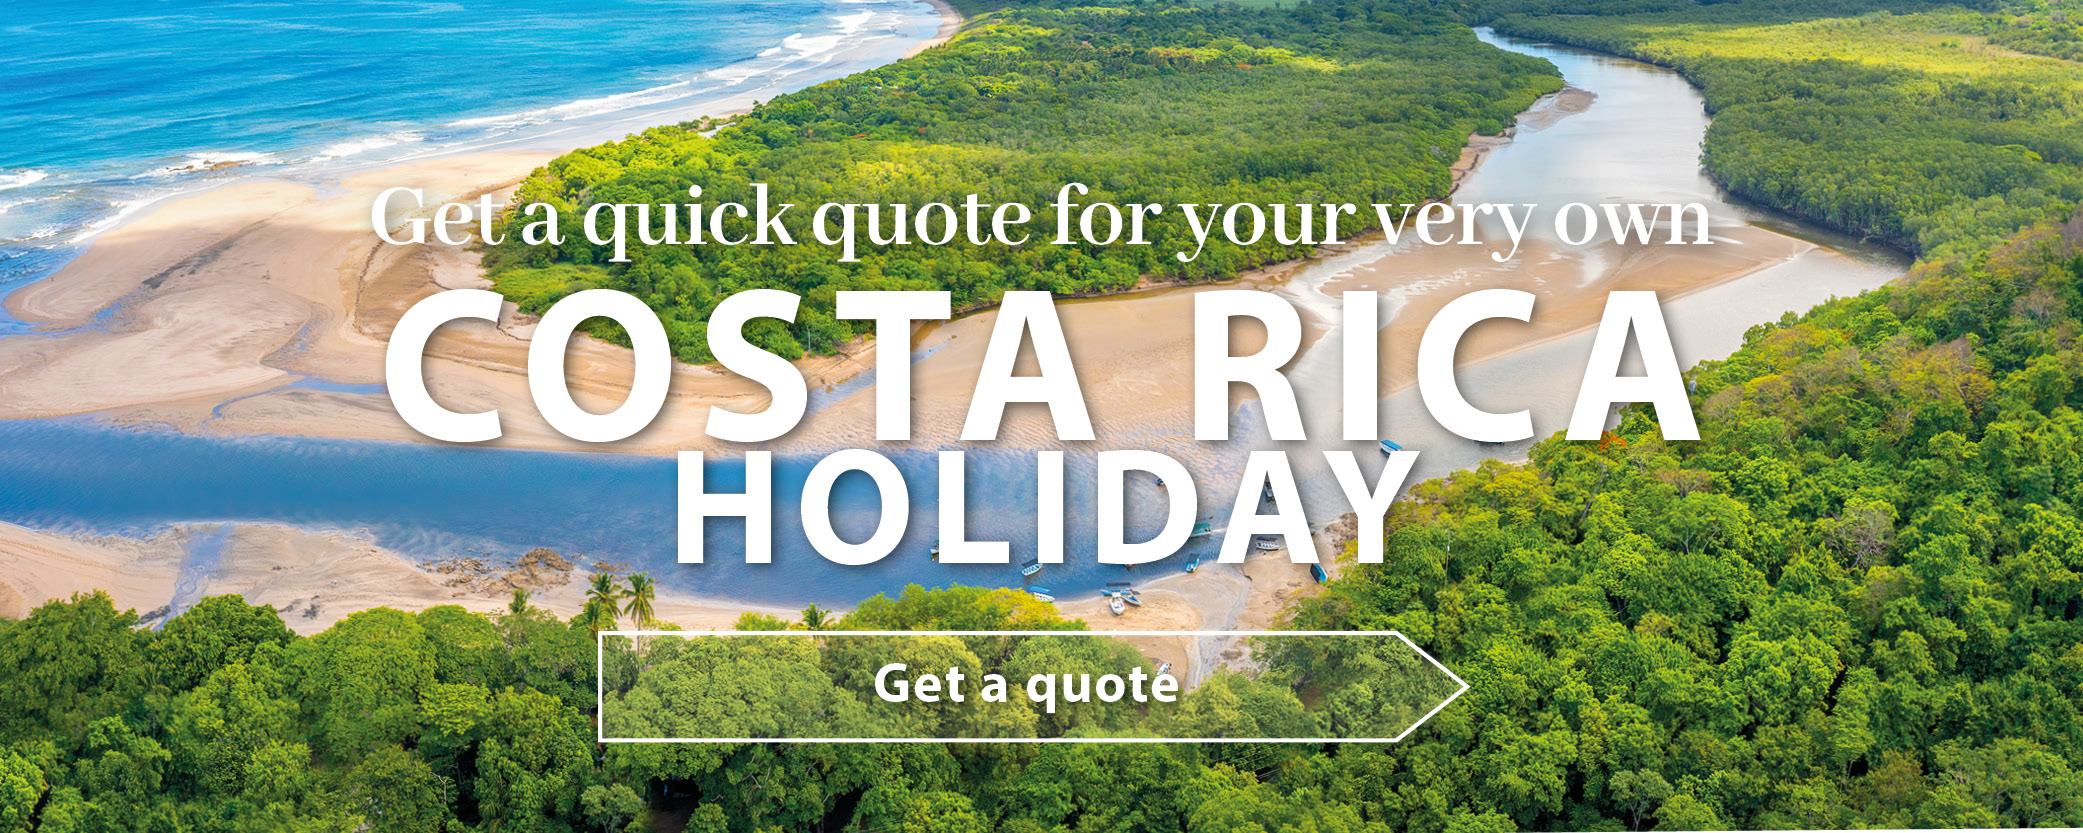 Get a quote for your secret Costa Rica holiday